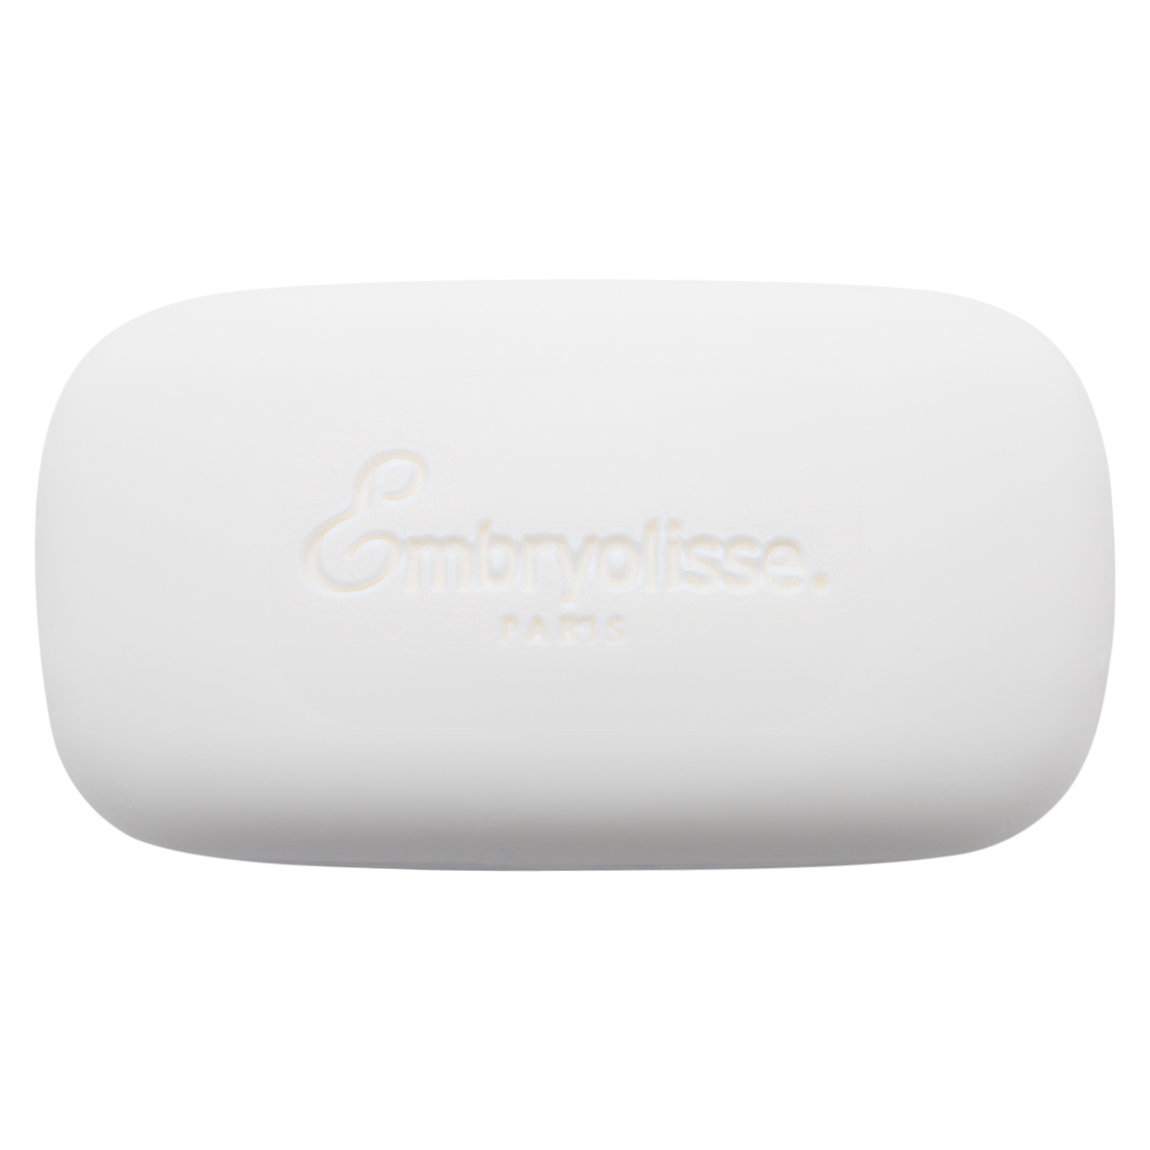 Embryolisse Gentle Cleansing Bar alternative view 1 - product swatch.